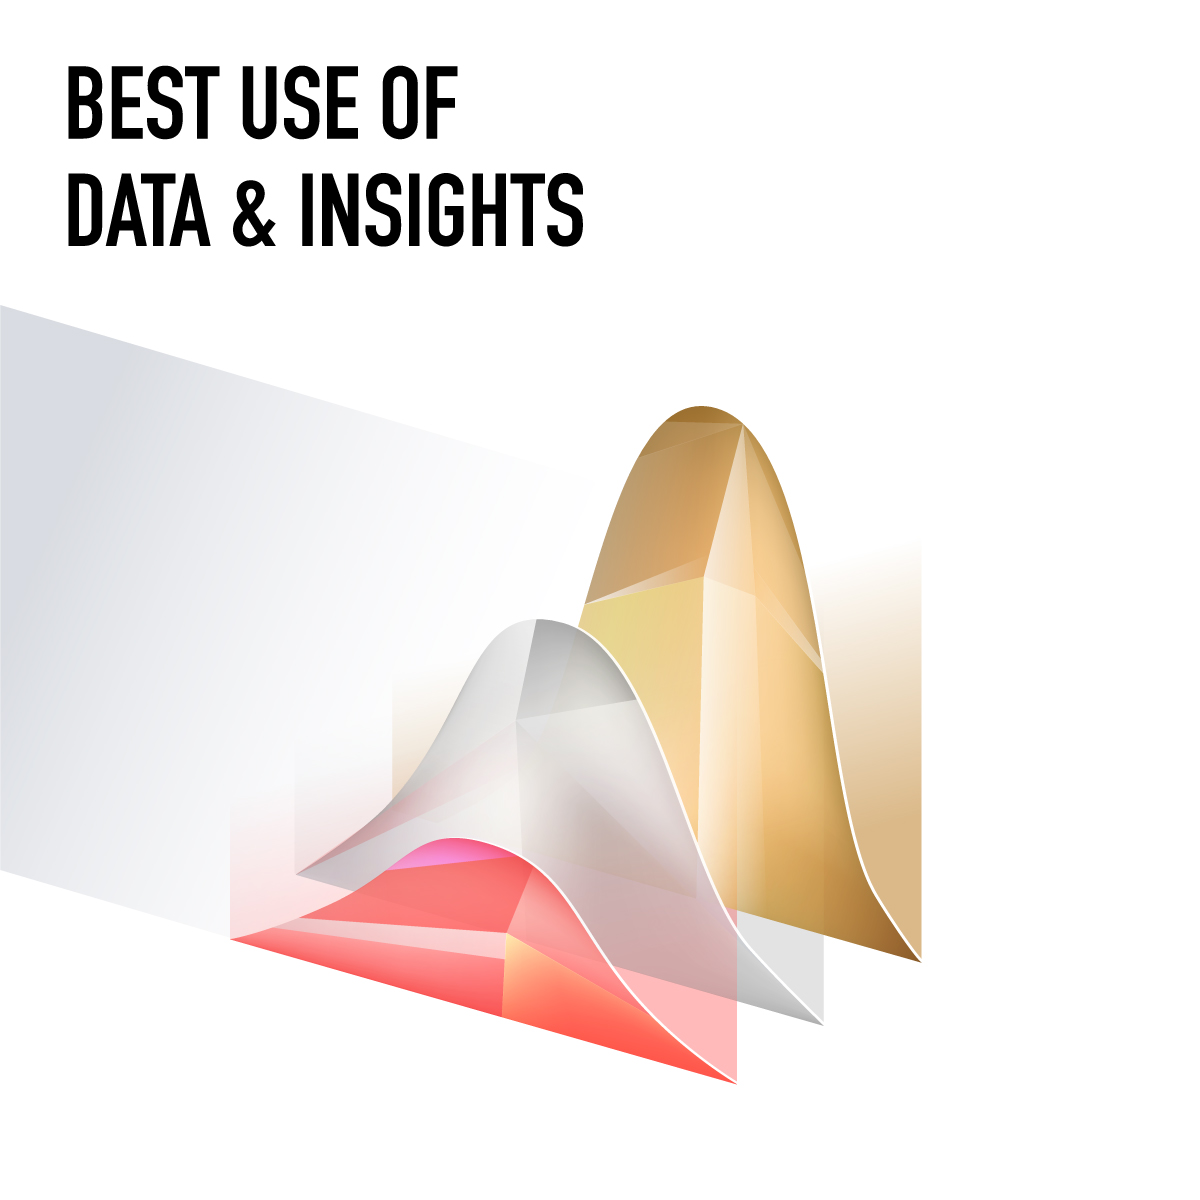 Best Use of Data & Insights